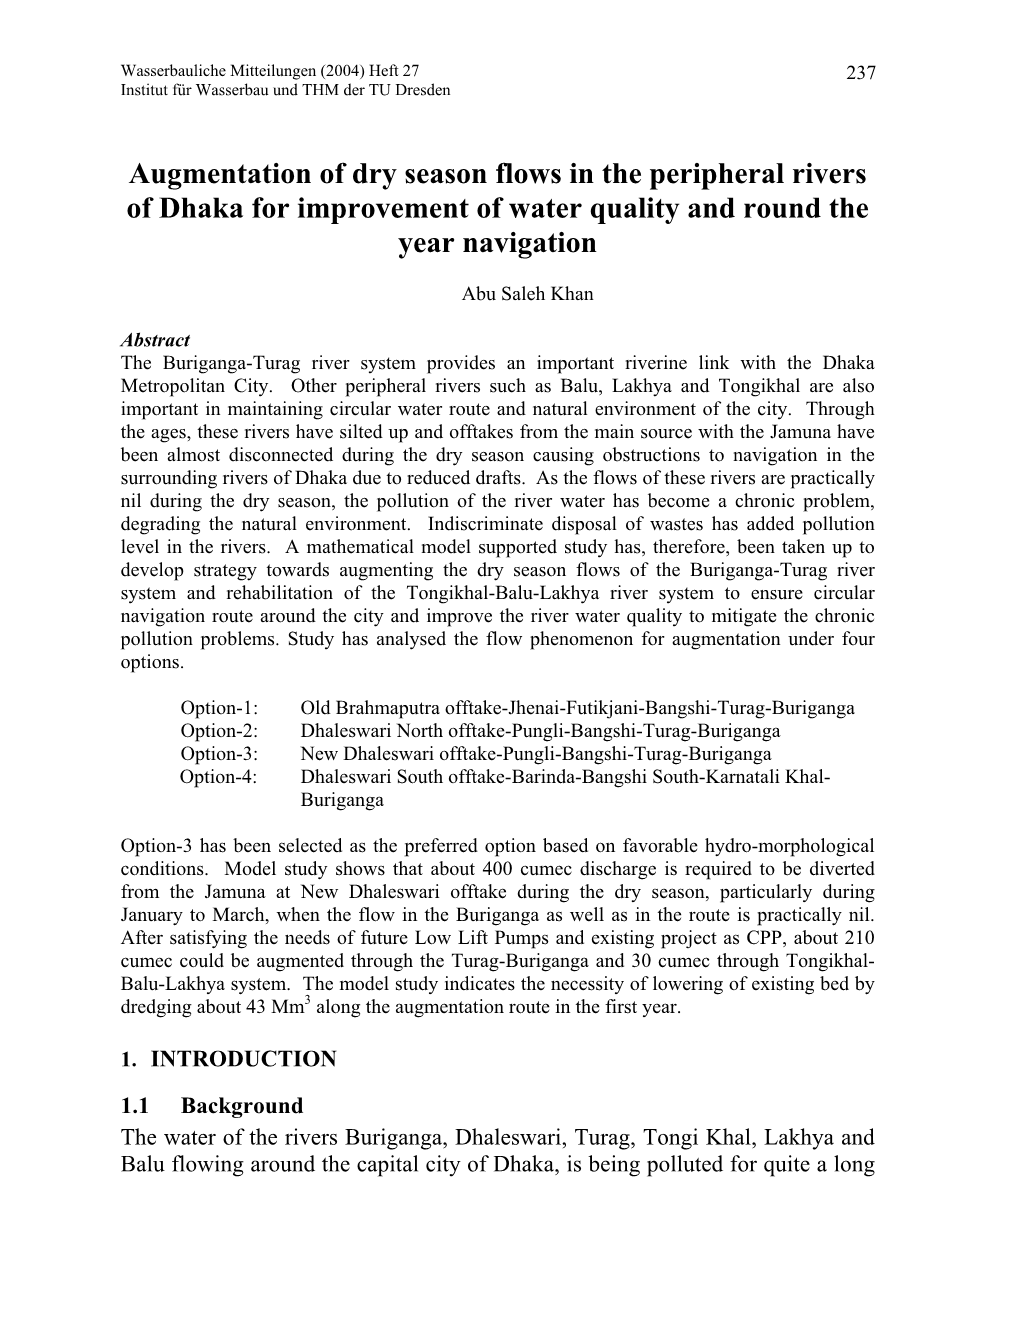 Augmentation of Dry Season Flows in the Peripheral Rivers of Dhaka for Improvement of Water Quality and Round the Year Navigation